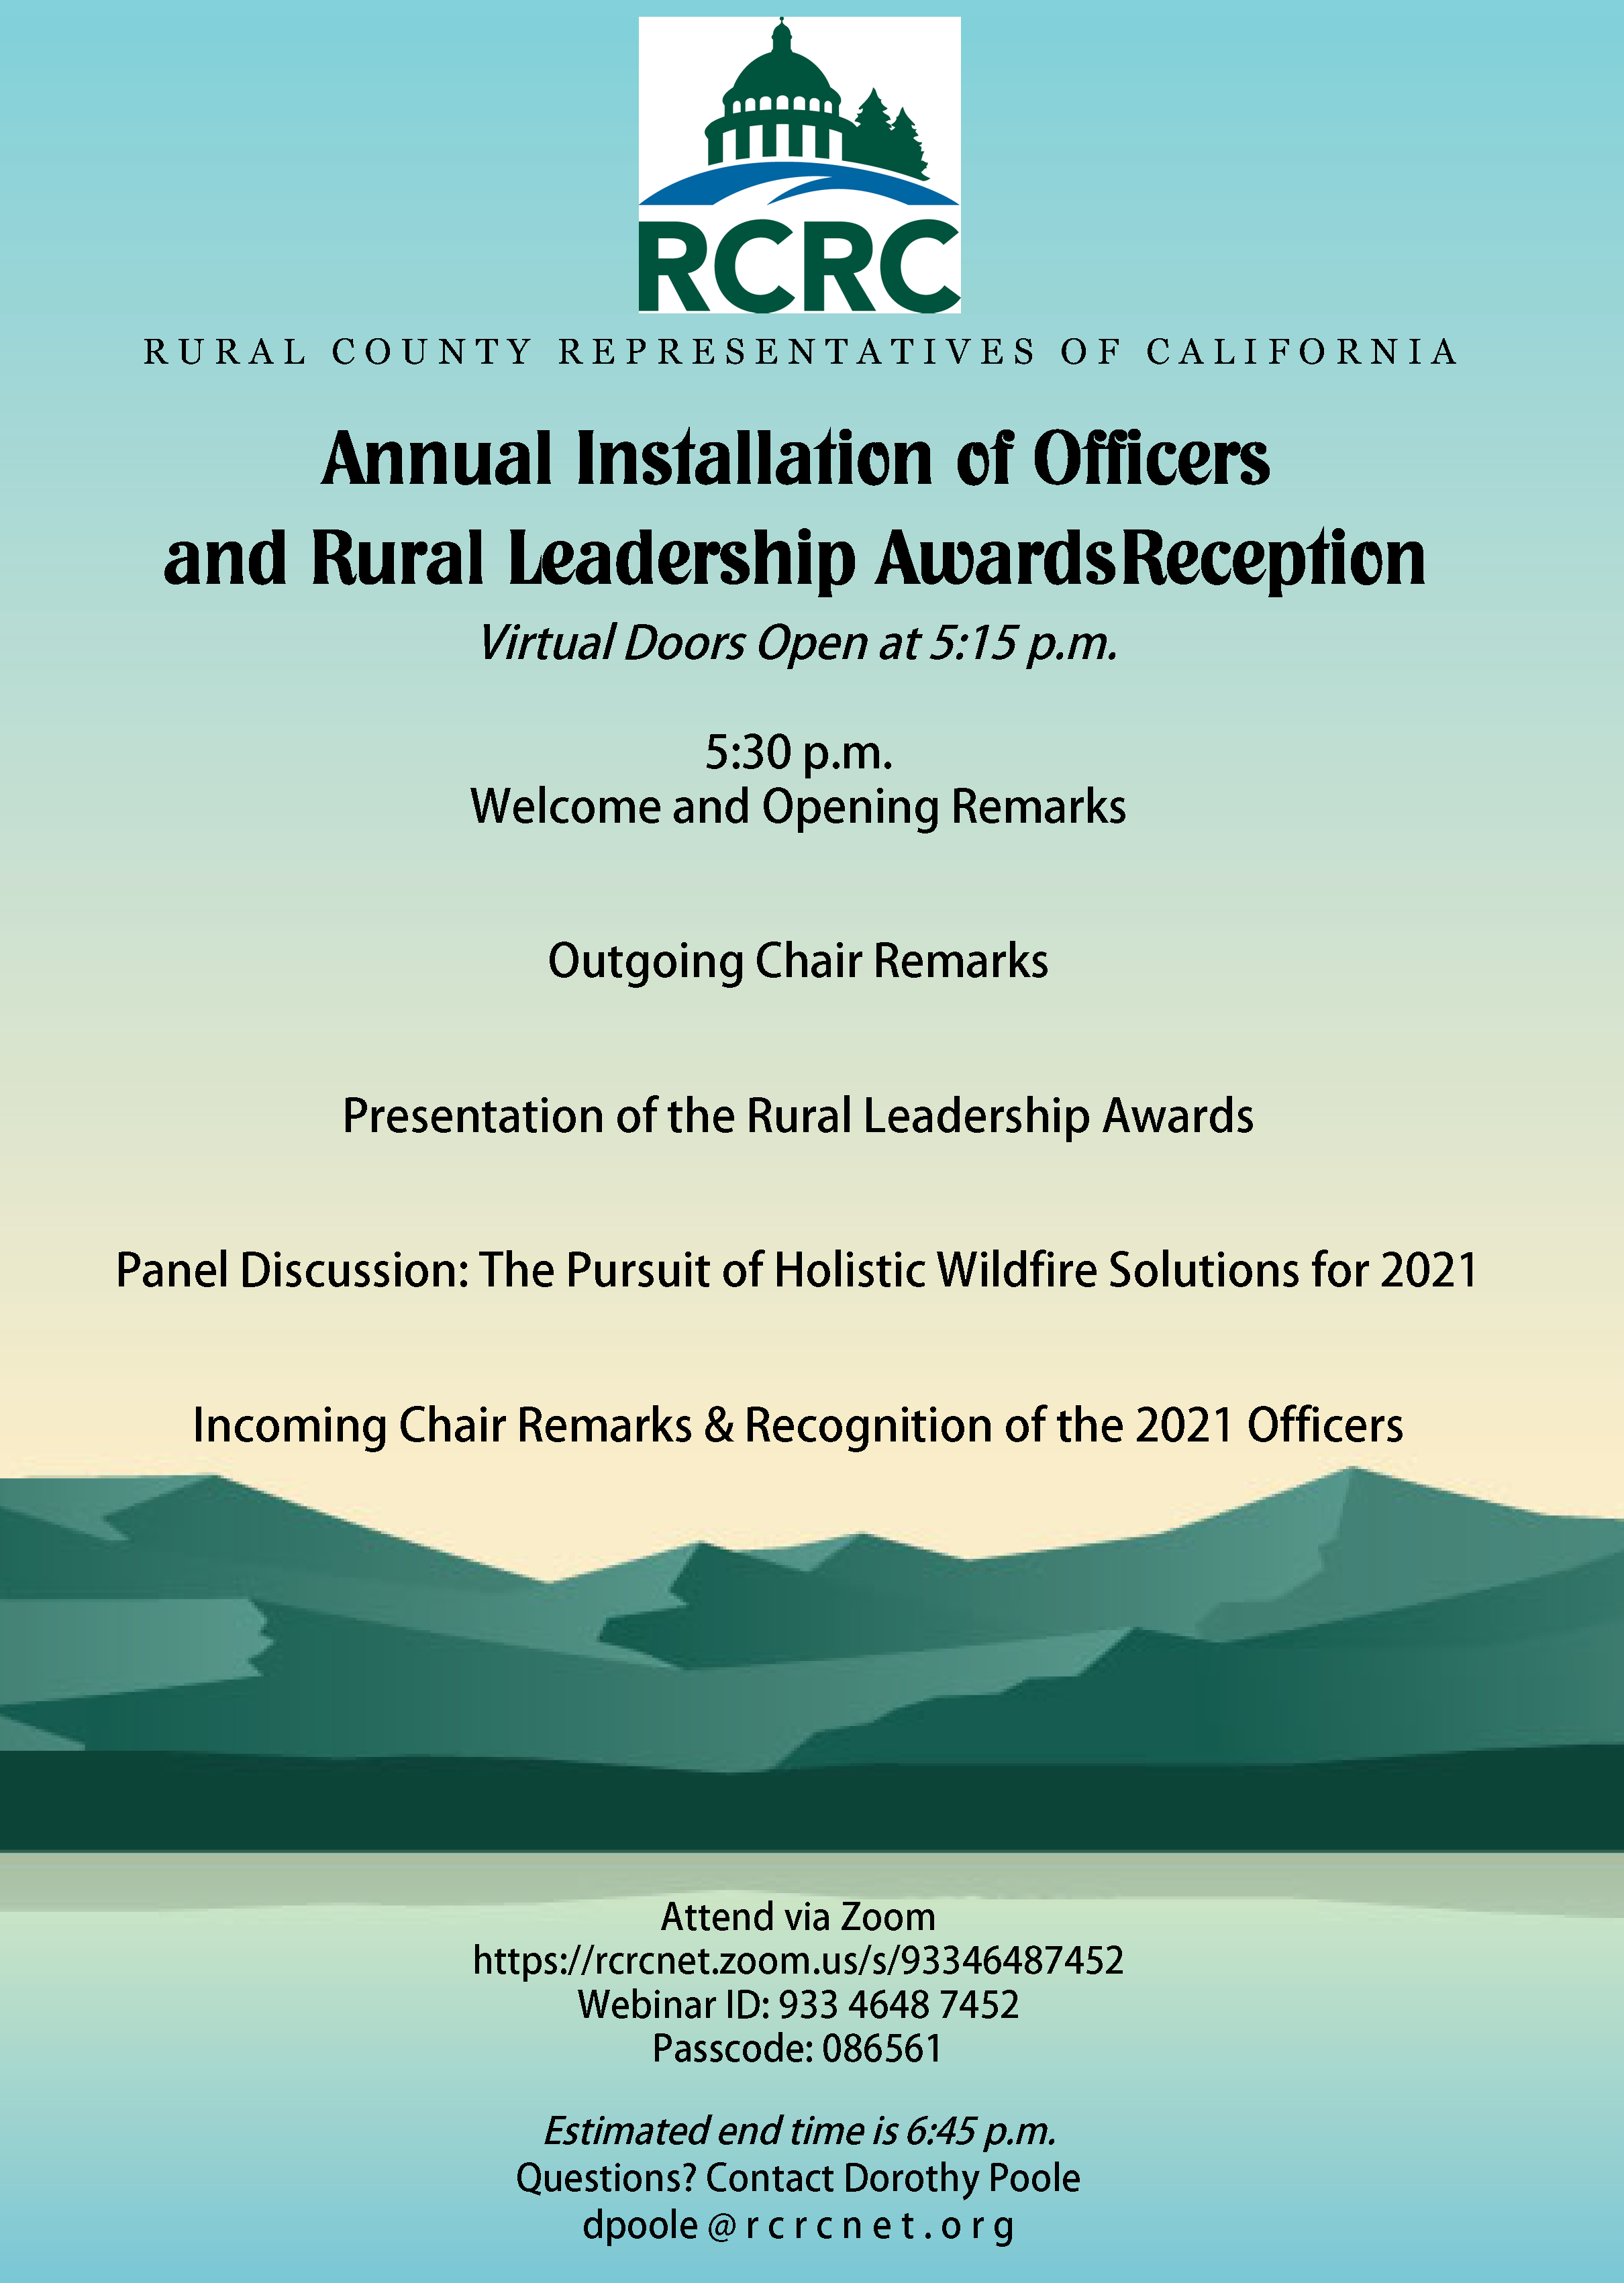 RCRC Annual Installation of Officers and Rural Leadership Awards